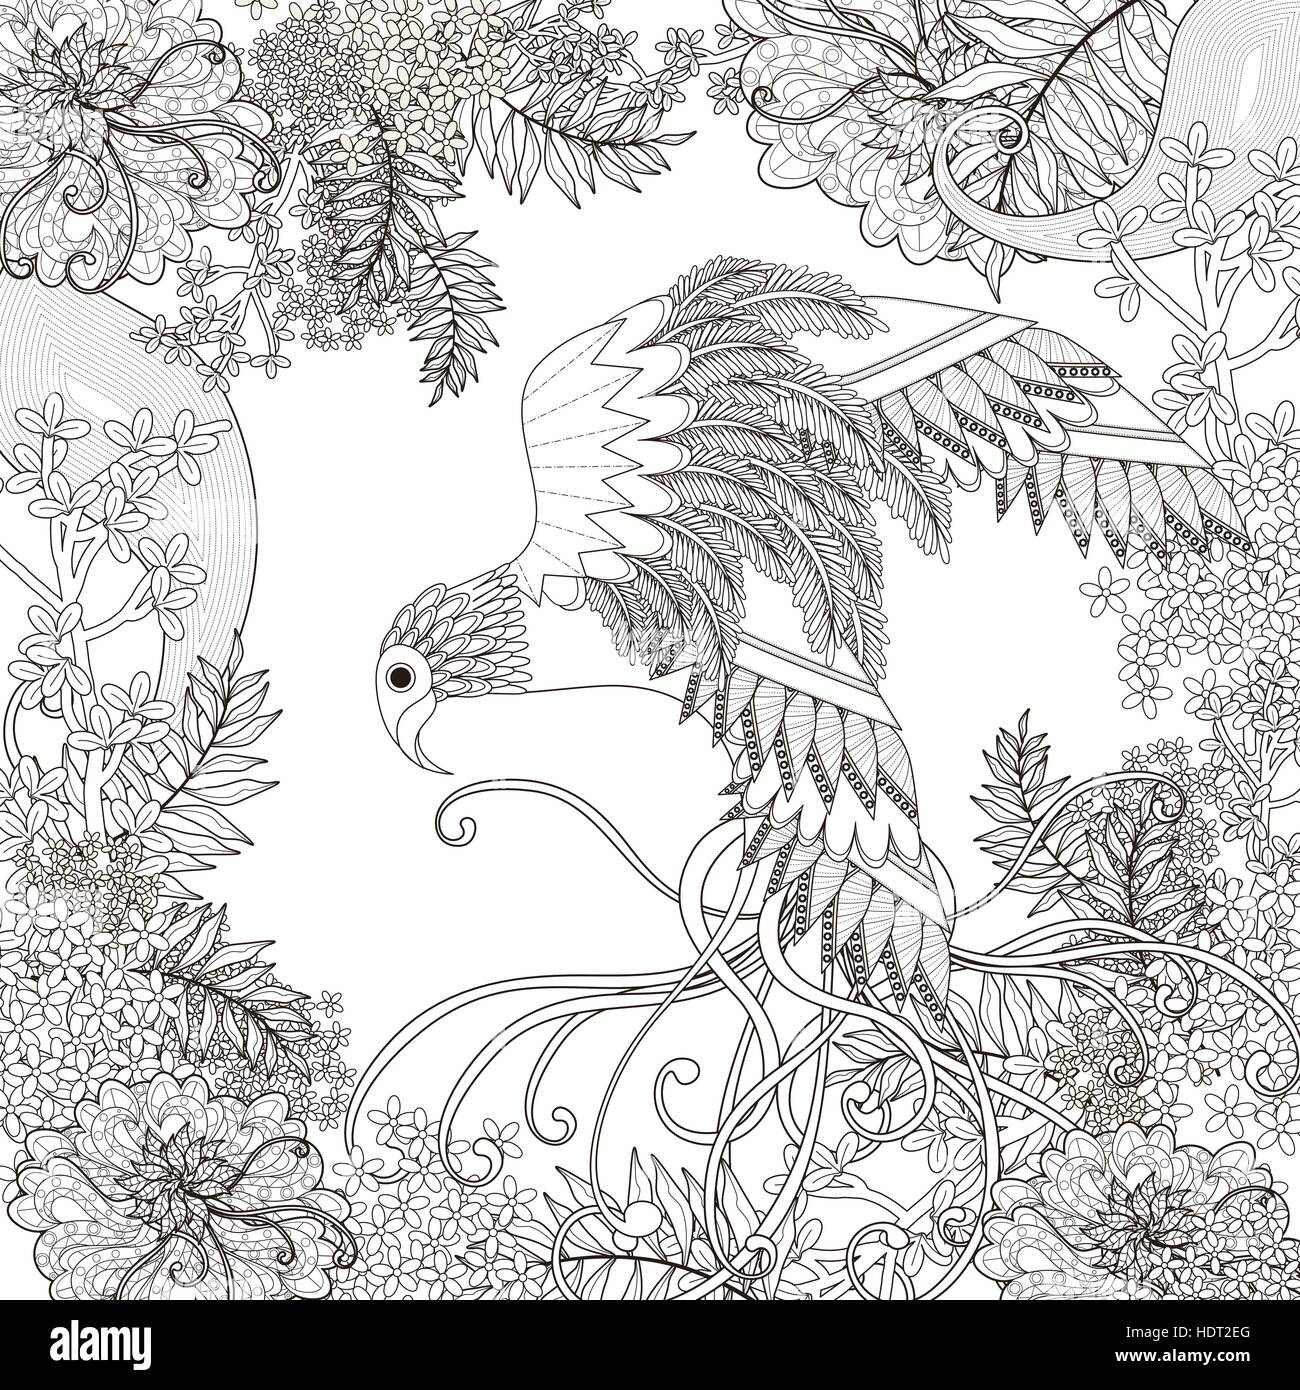 beautiful flying bird coloring page with floral elements in ...